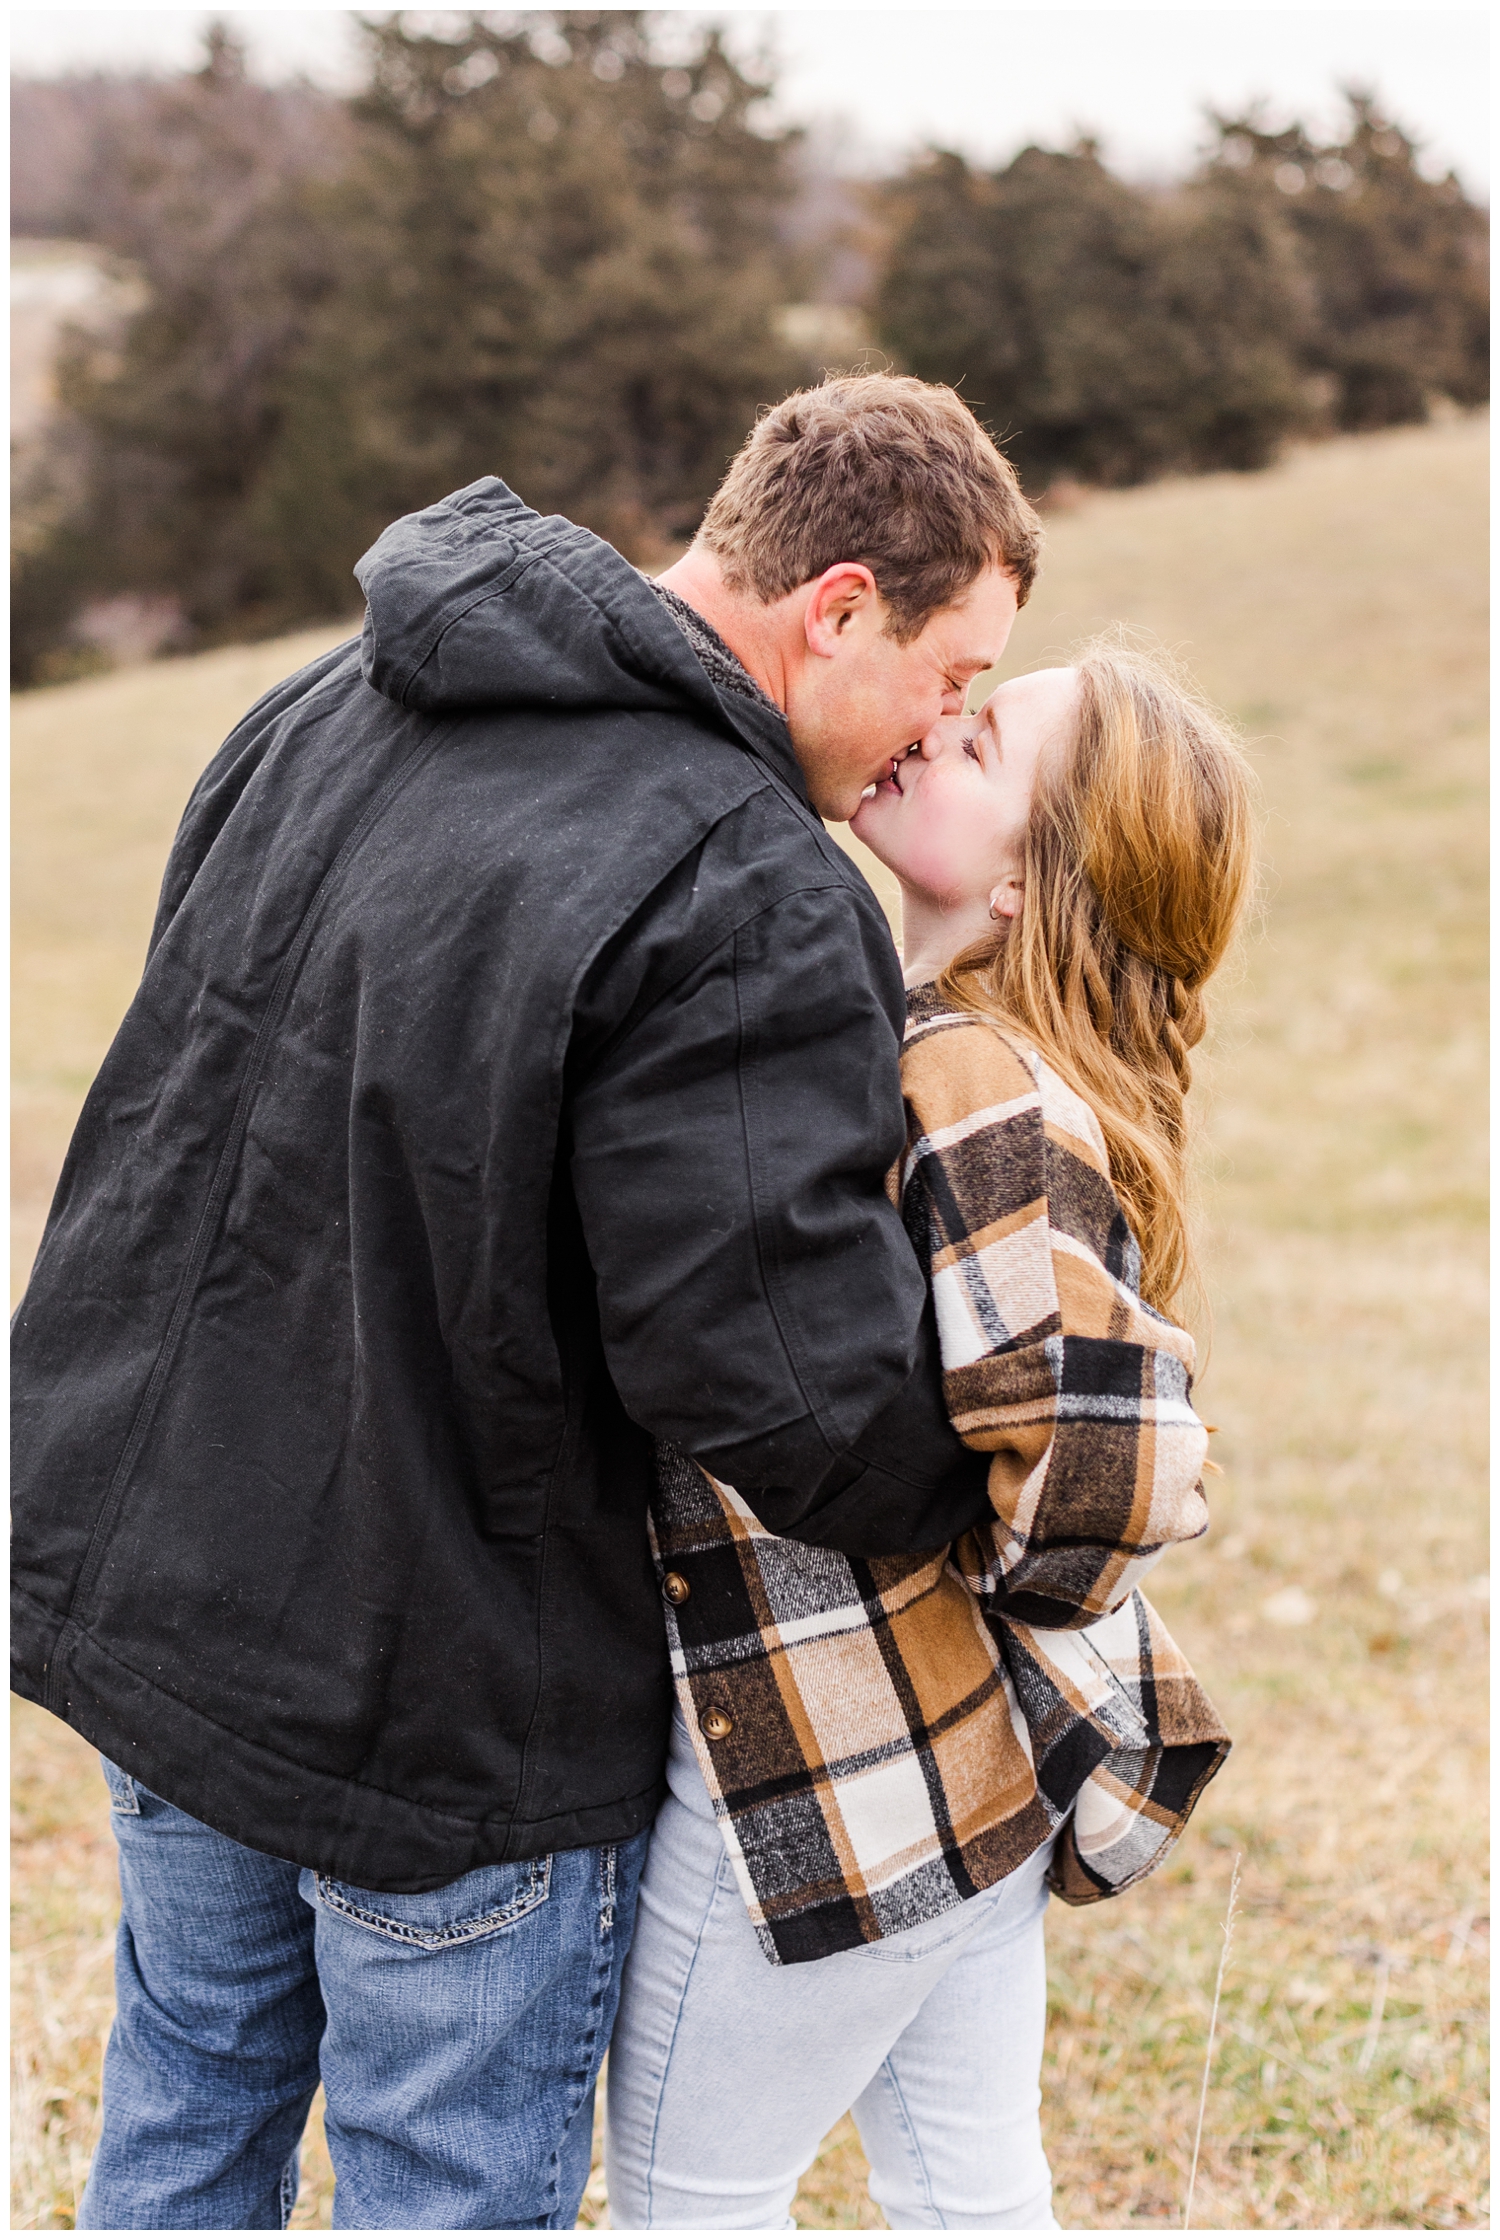 Travis and Abi share a kiss in a grassy filed in Iowa in the middle of winter | CB Studio